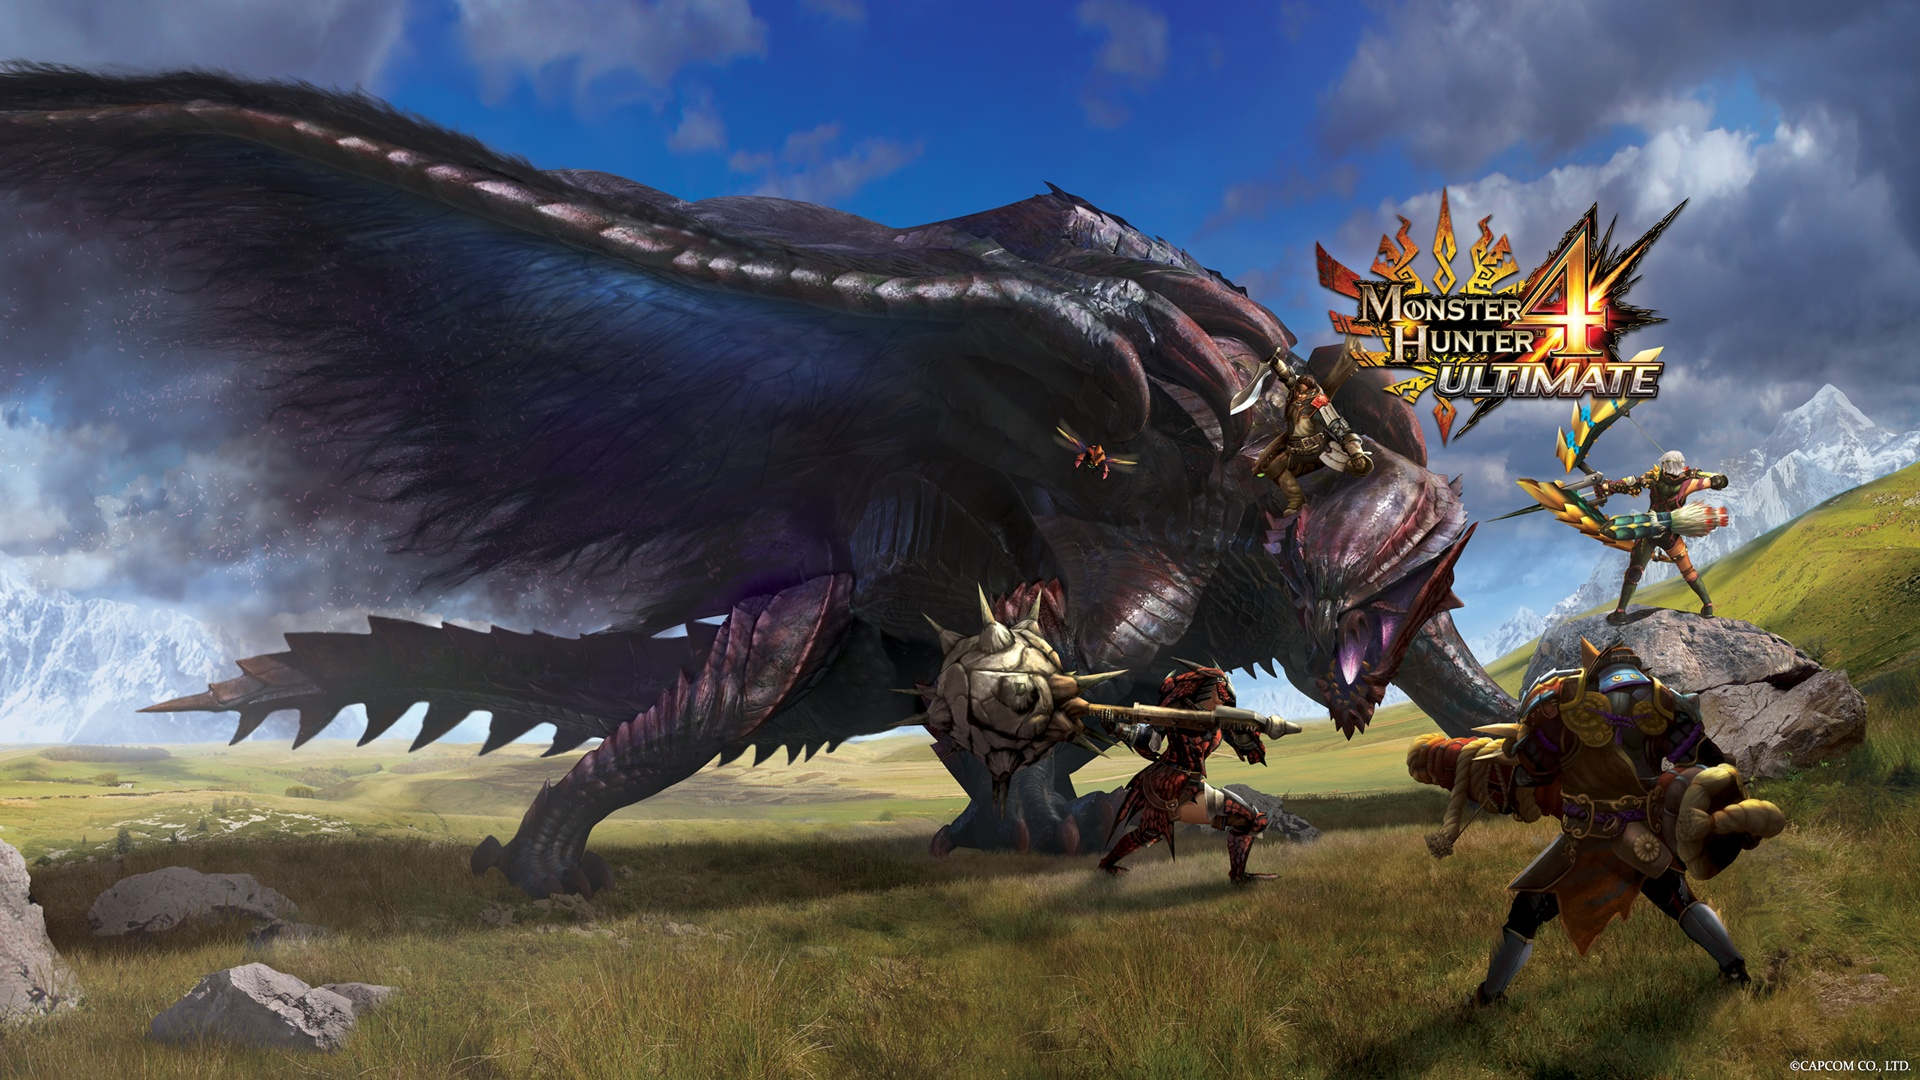 Expects Monster Hunter Ultimate To Reach Million